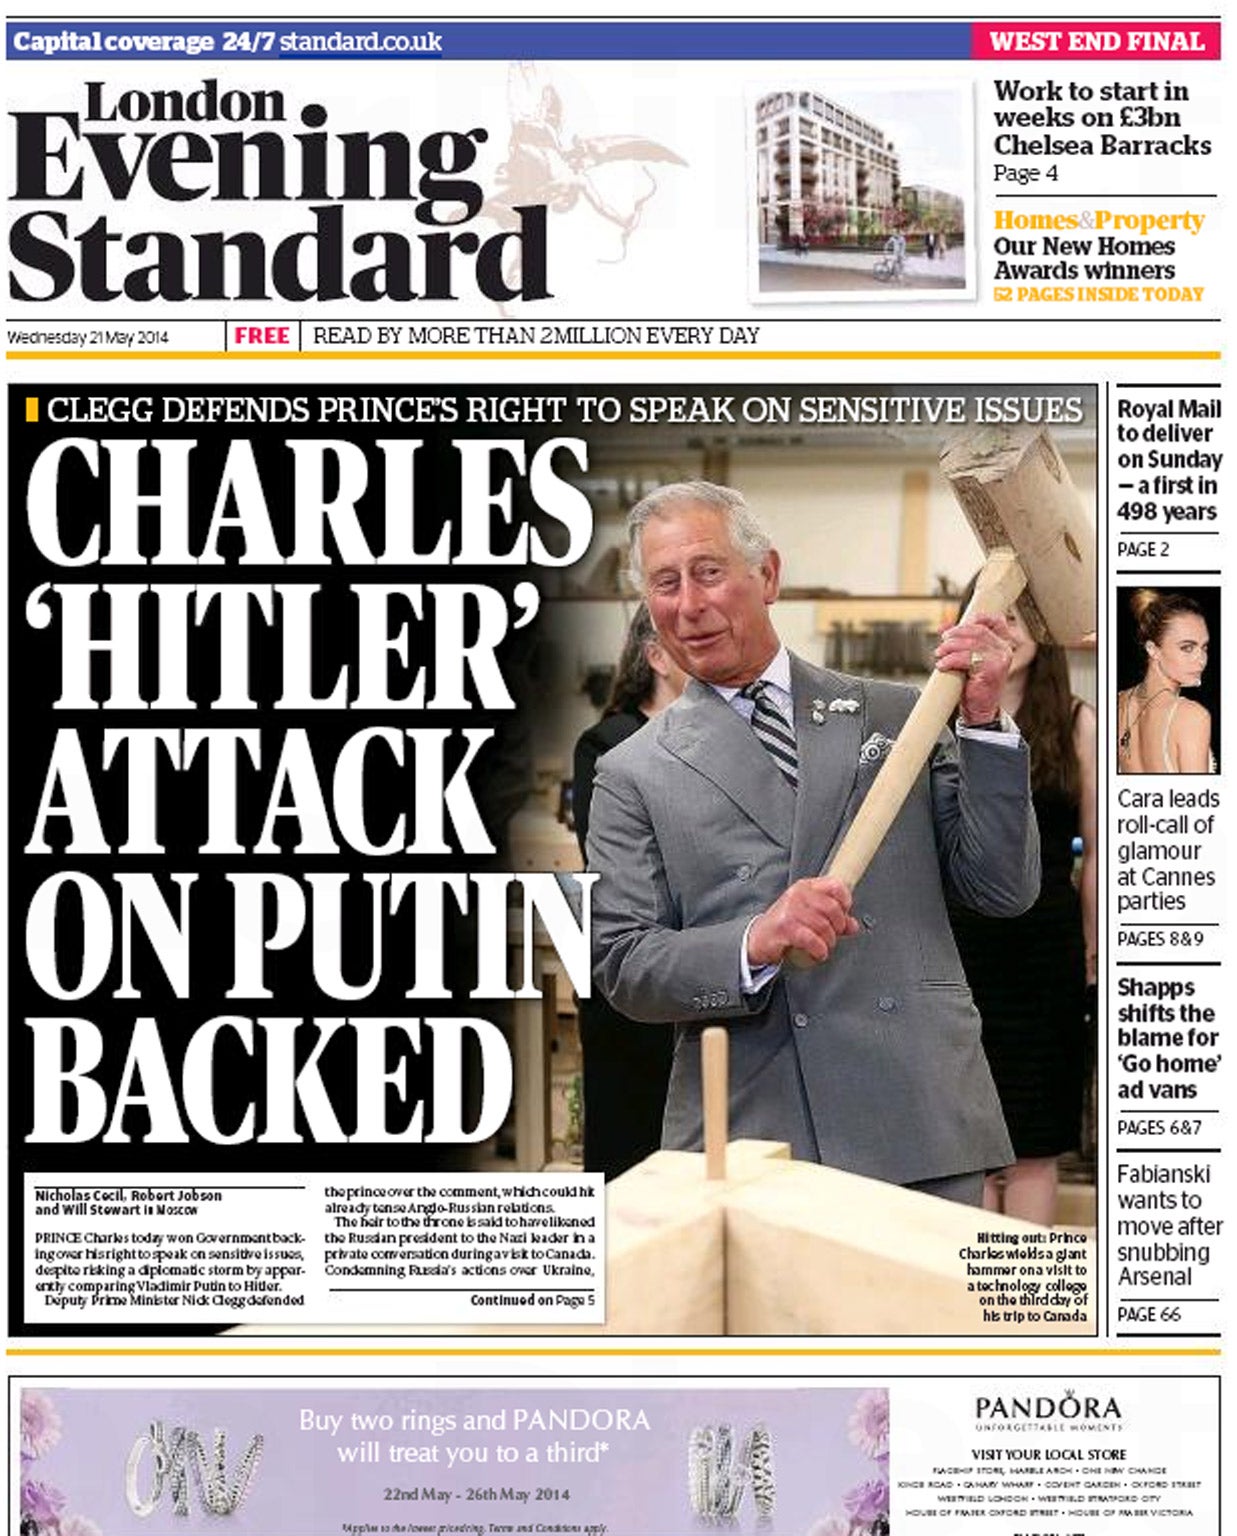 Today's Evening Standard front page